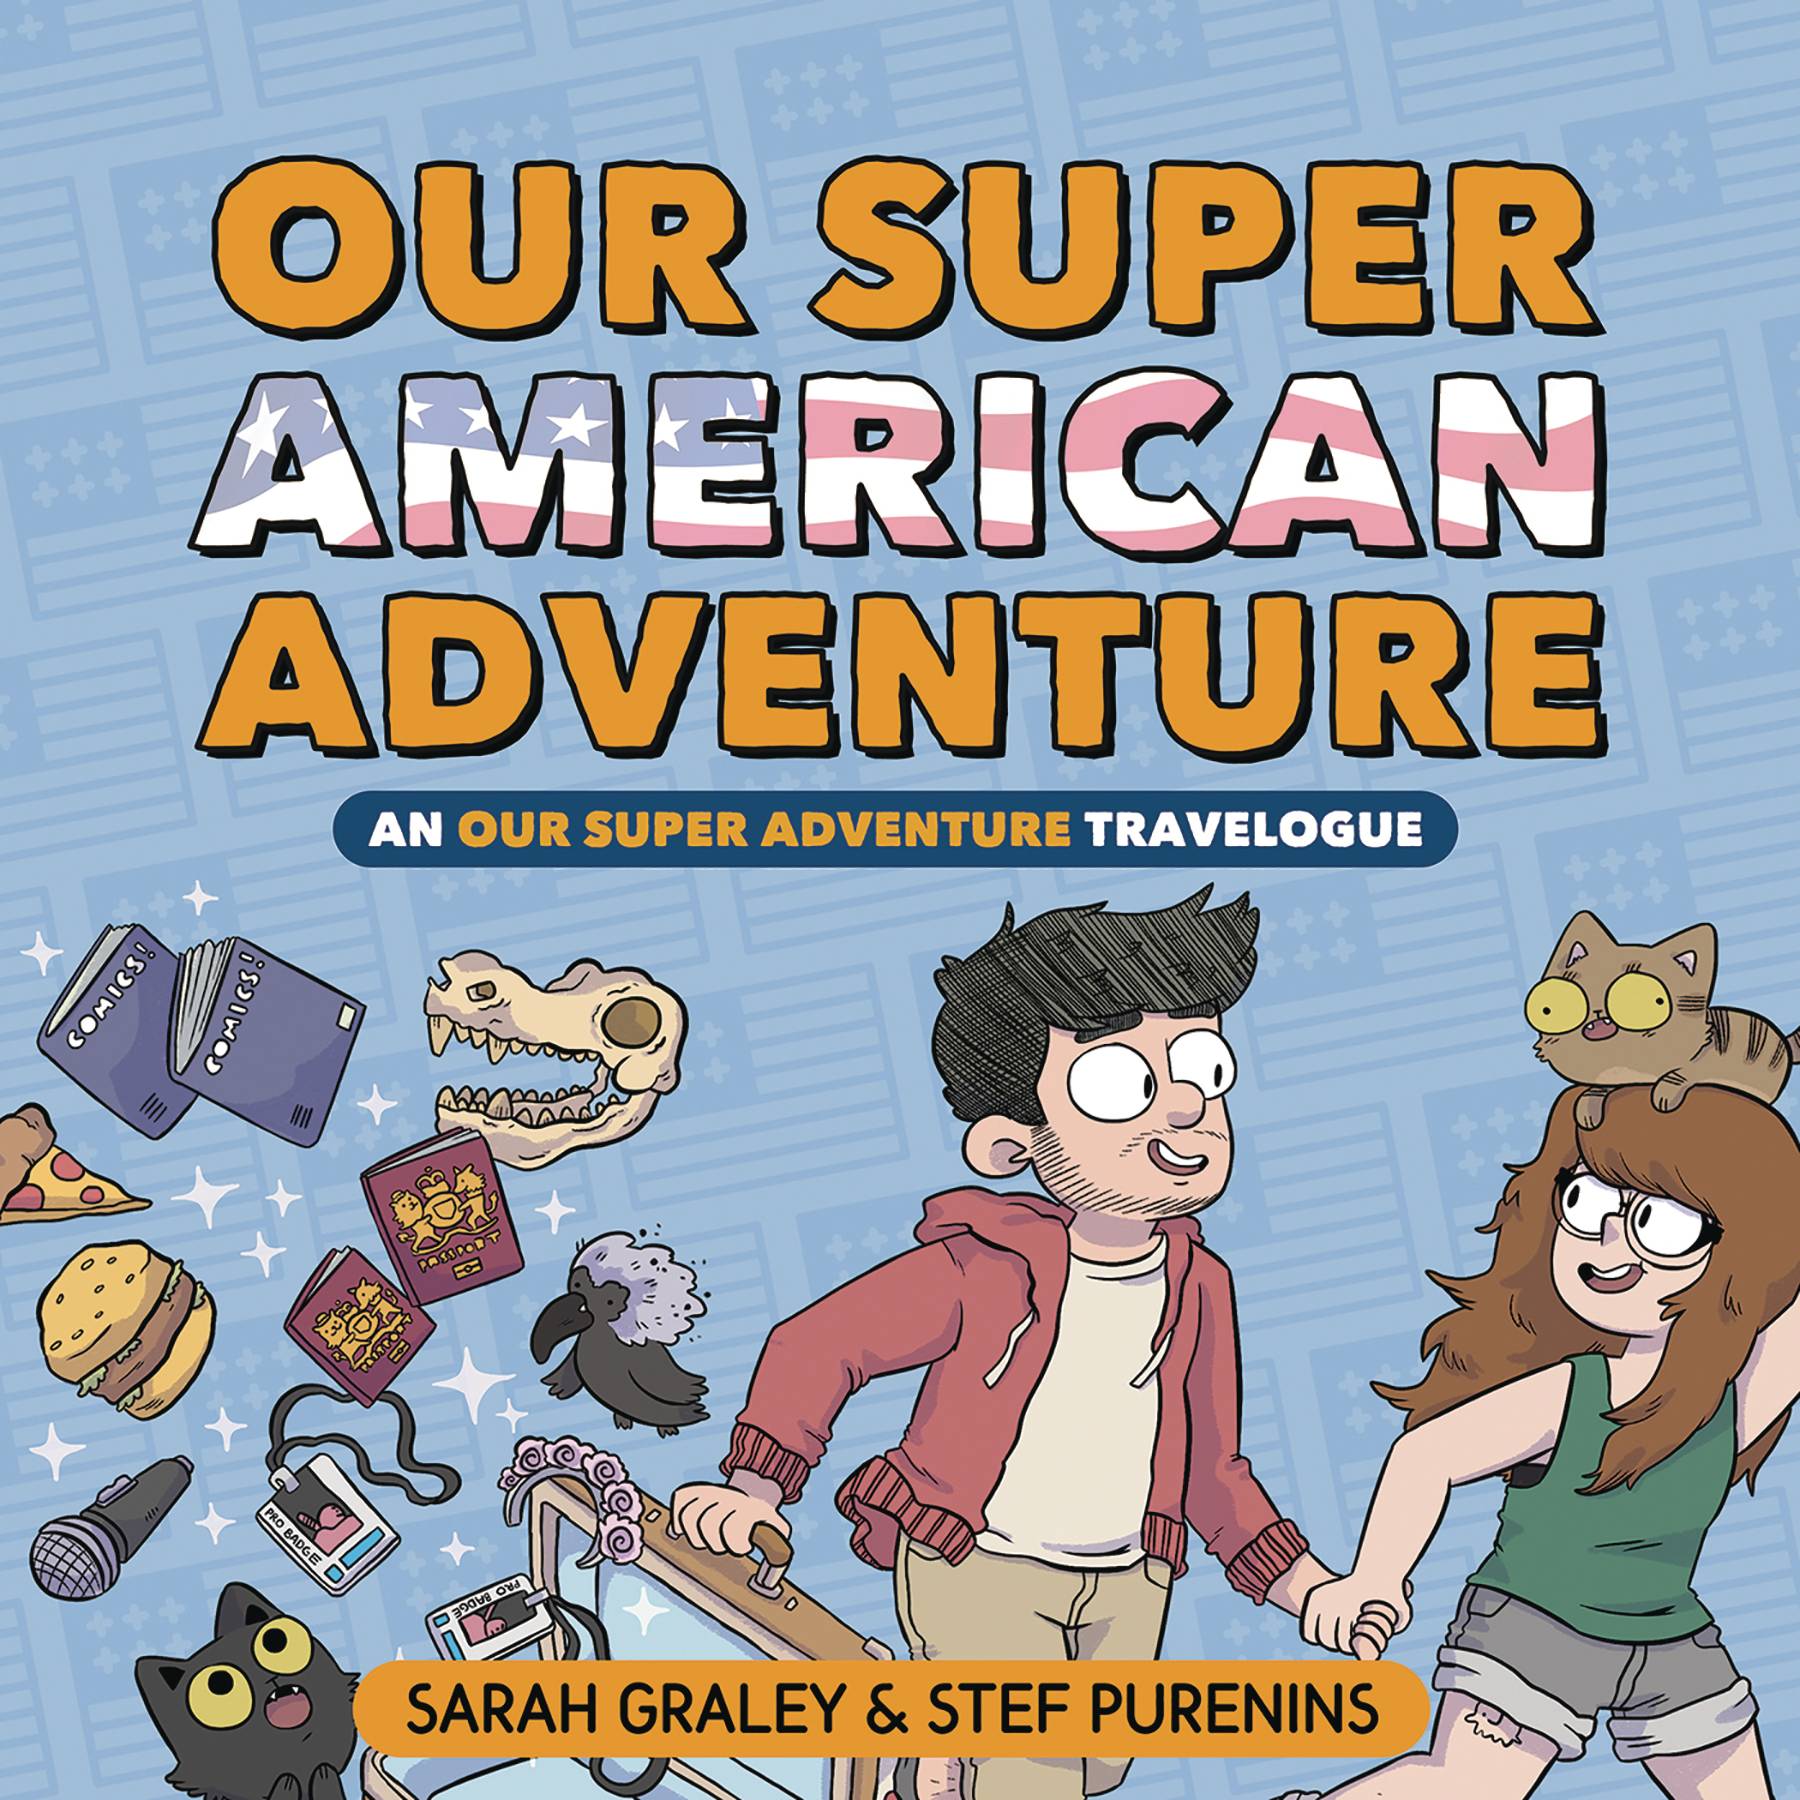 Our Super Adventure Travelogue Super American Hardcover